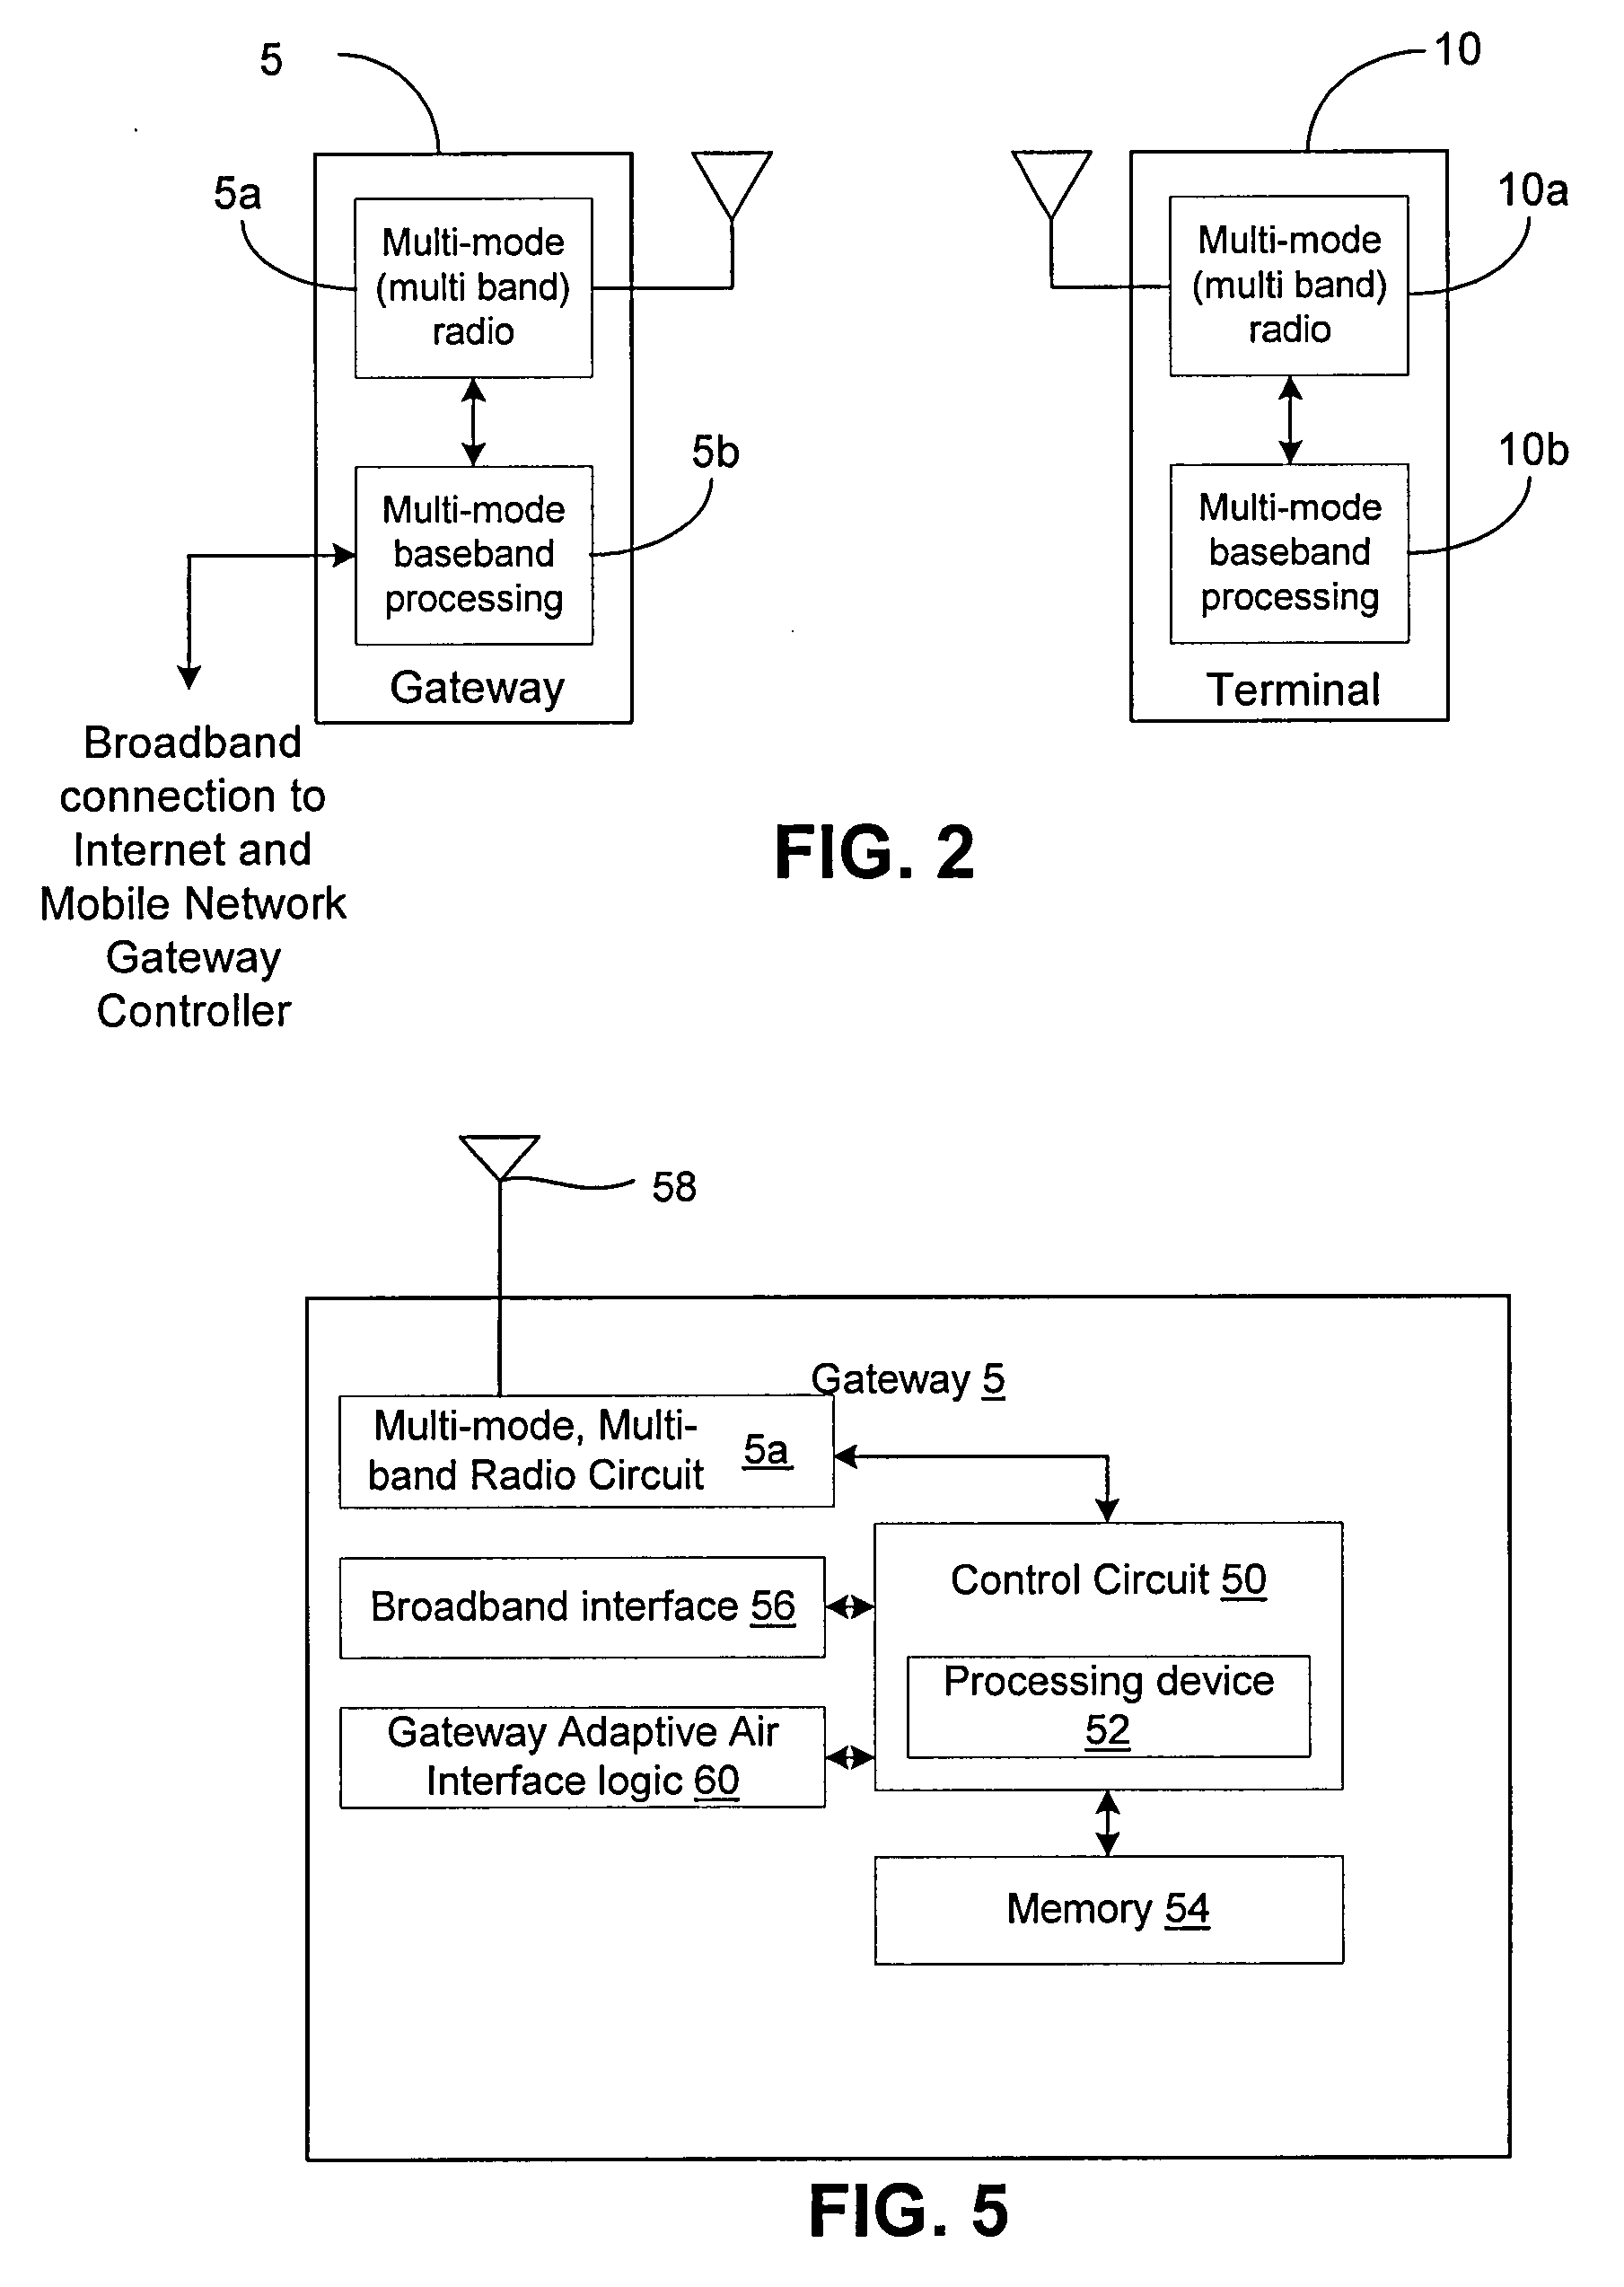 Gateway with adaptive air interfaces